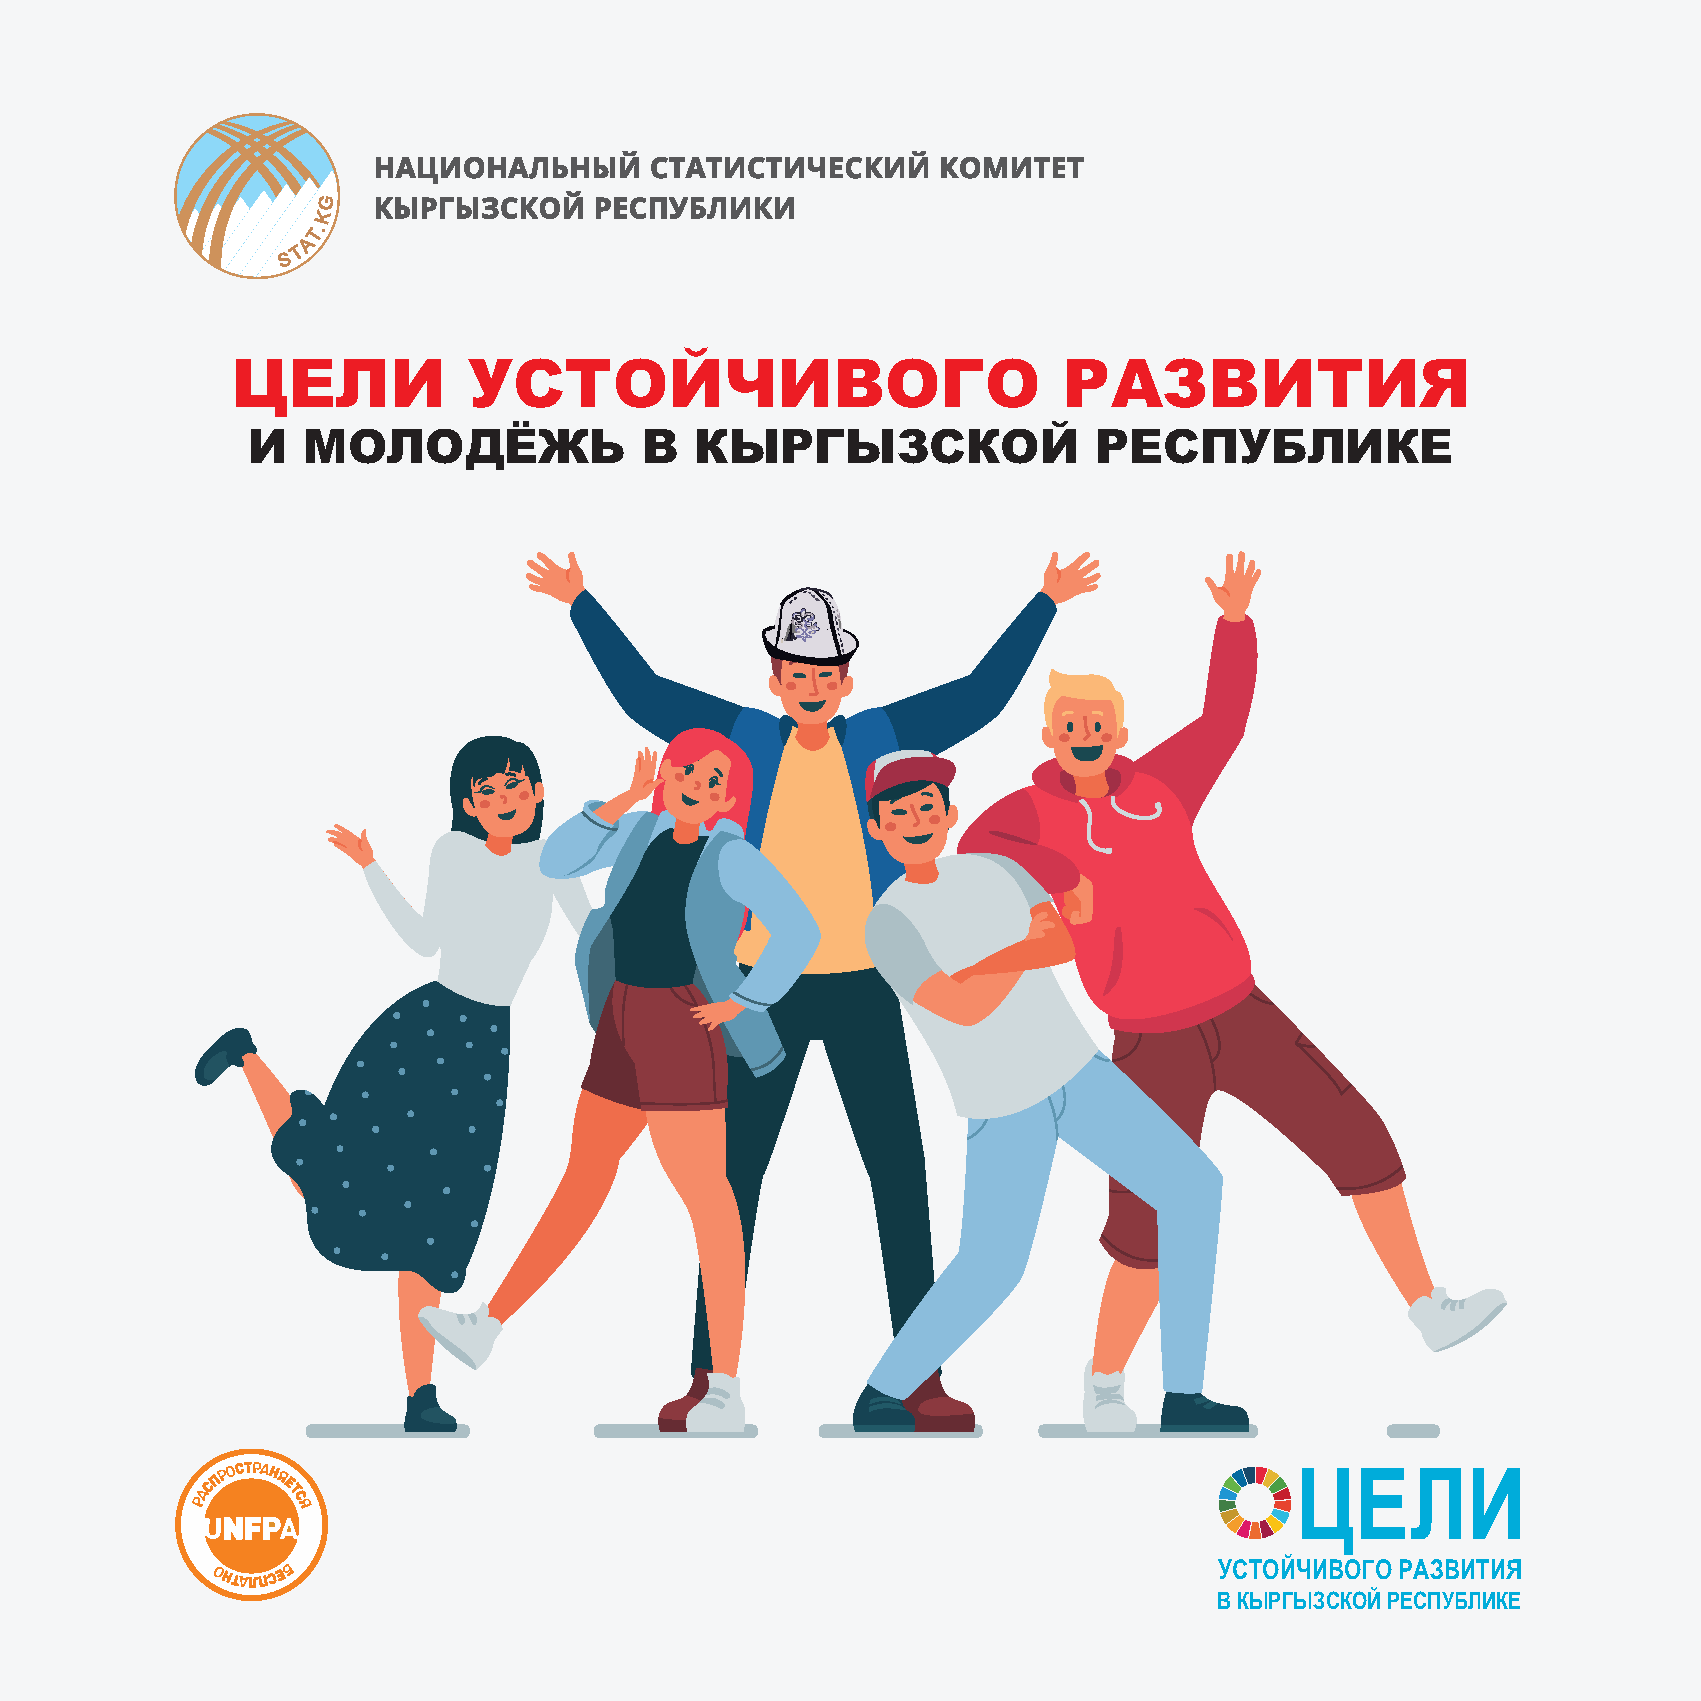 Sustainable Development Goals and Youth in the Kyrgyz Republic